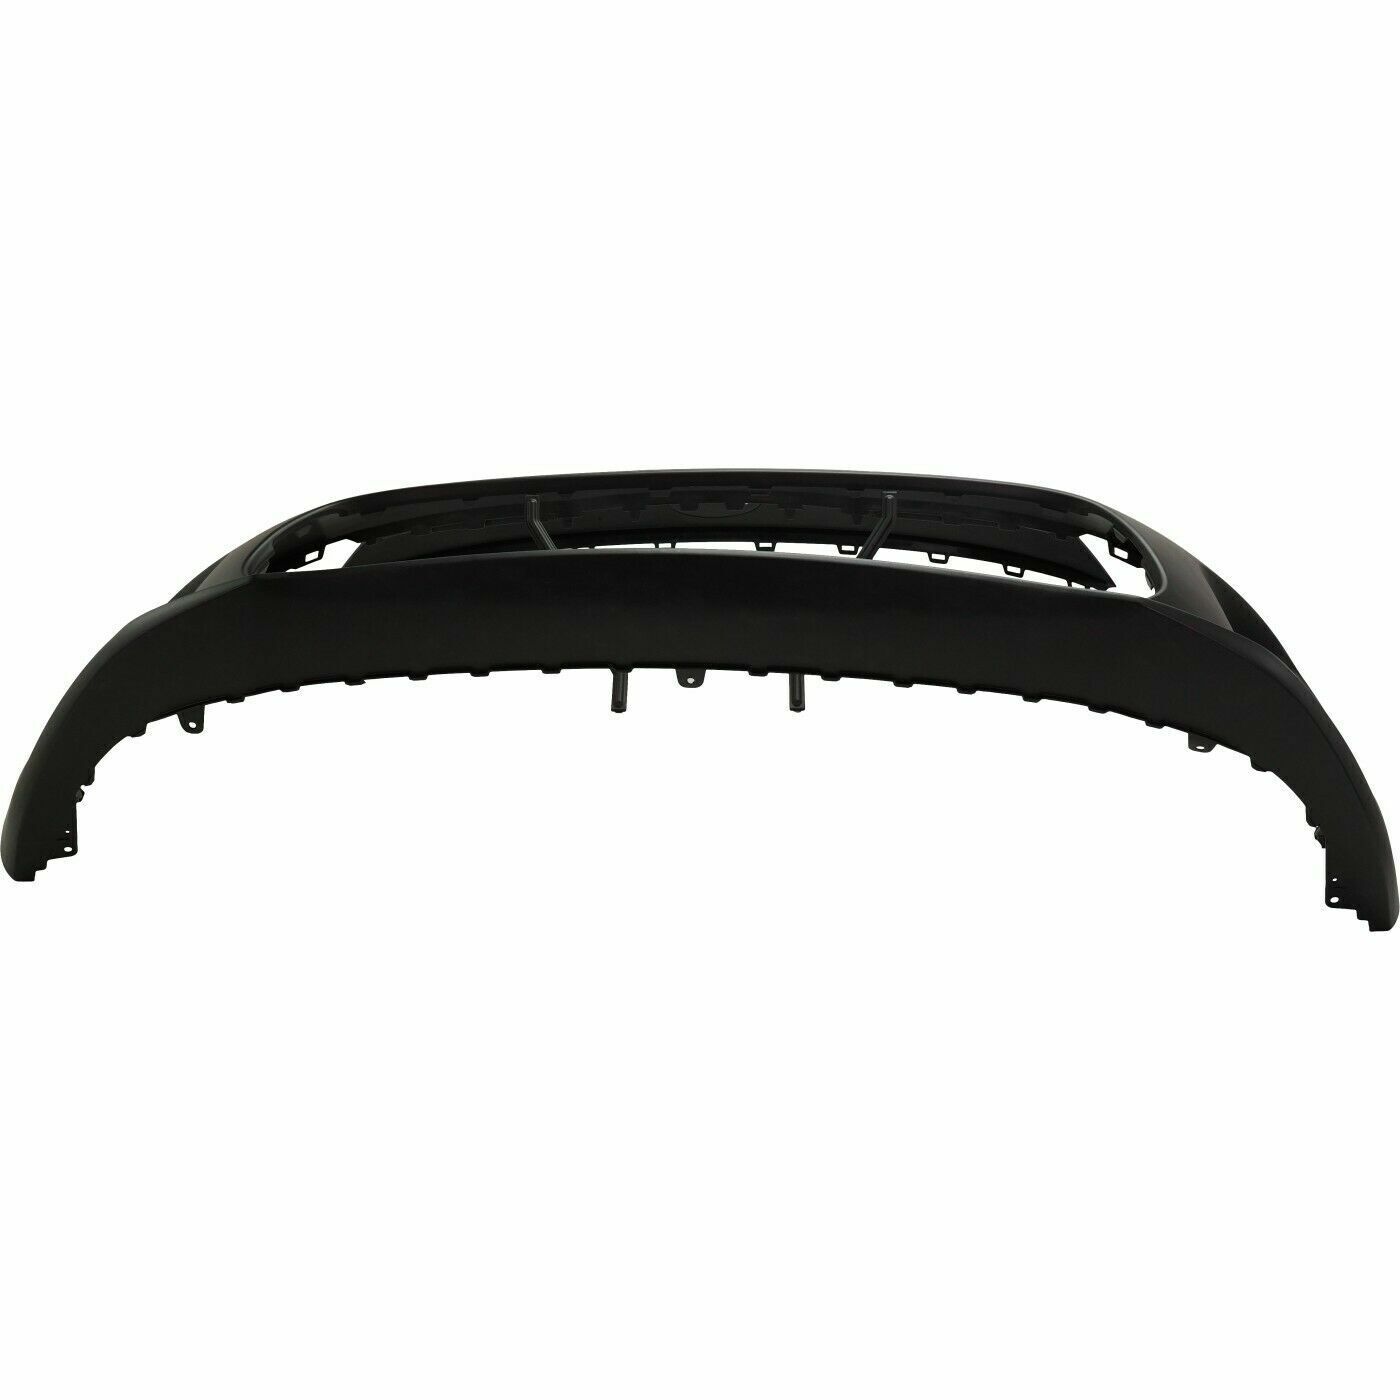 2018-2020 KIA RIO; Front Bumper Cover; HB Painted to Match